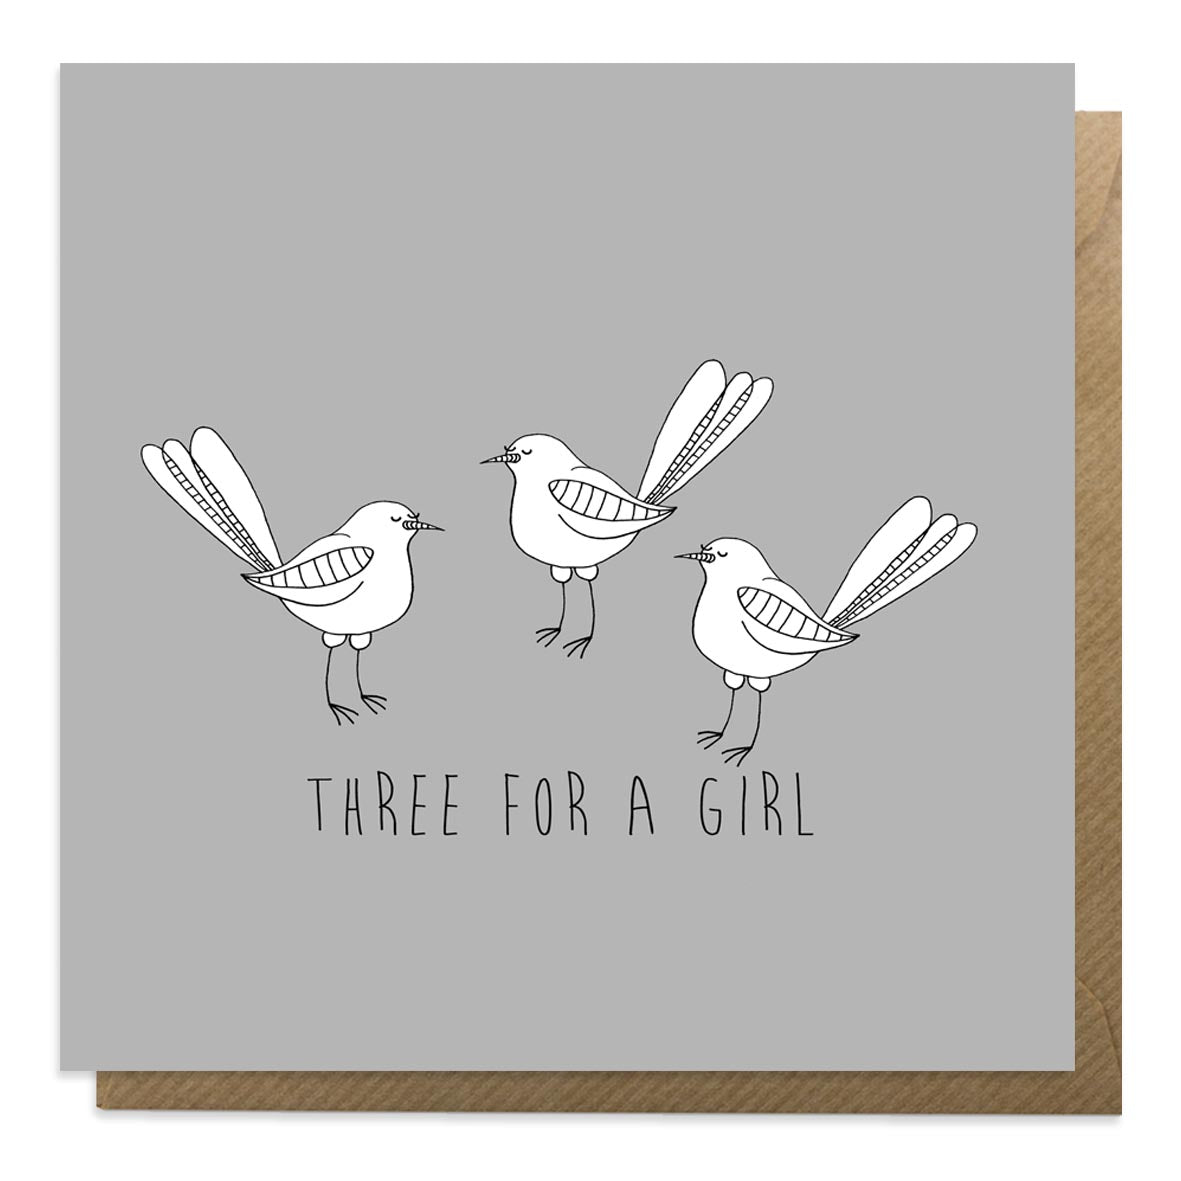 Grey greeting card with an illustration of three magpies